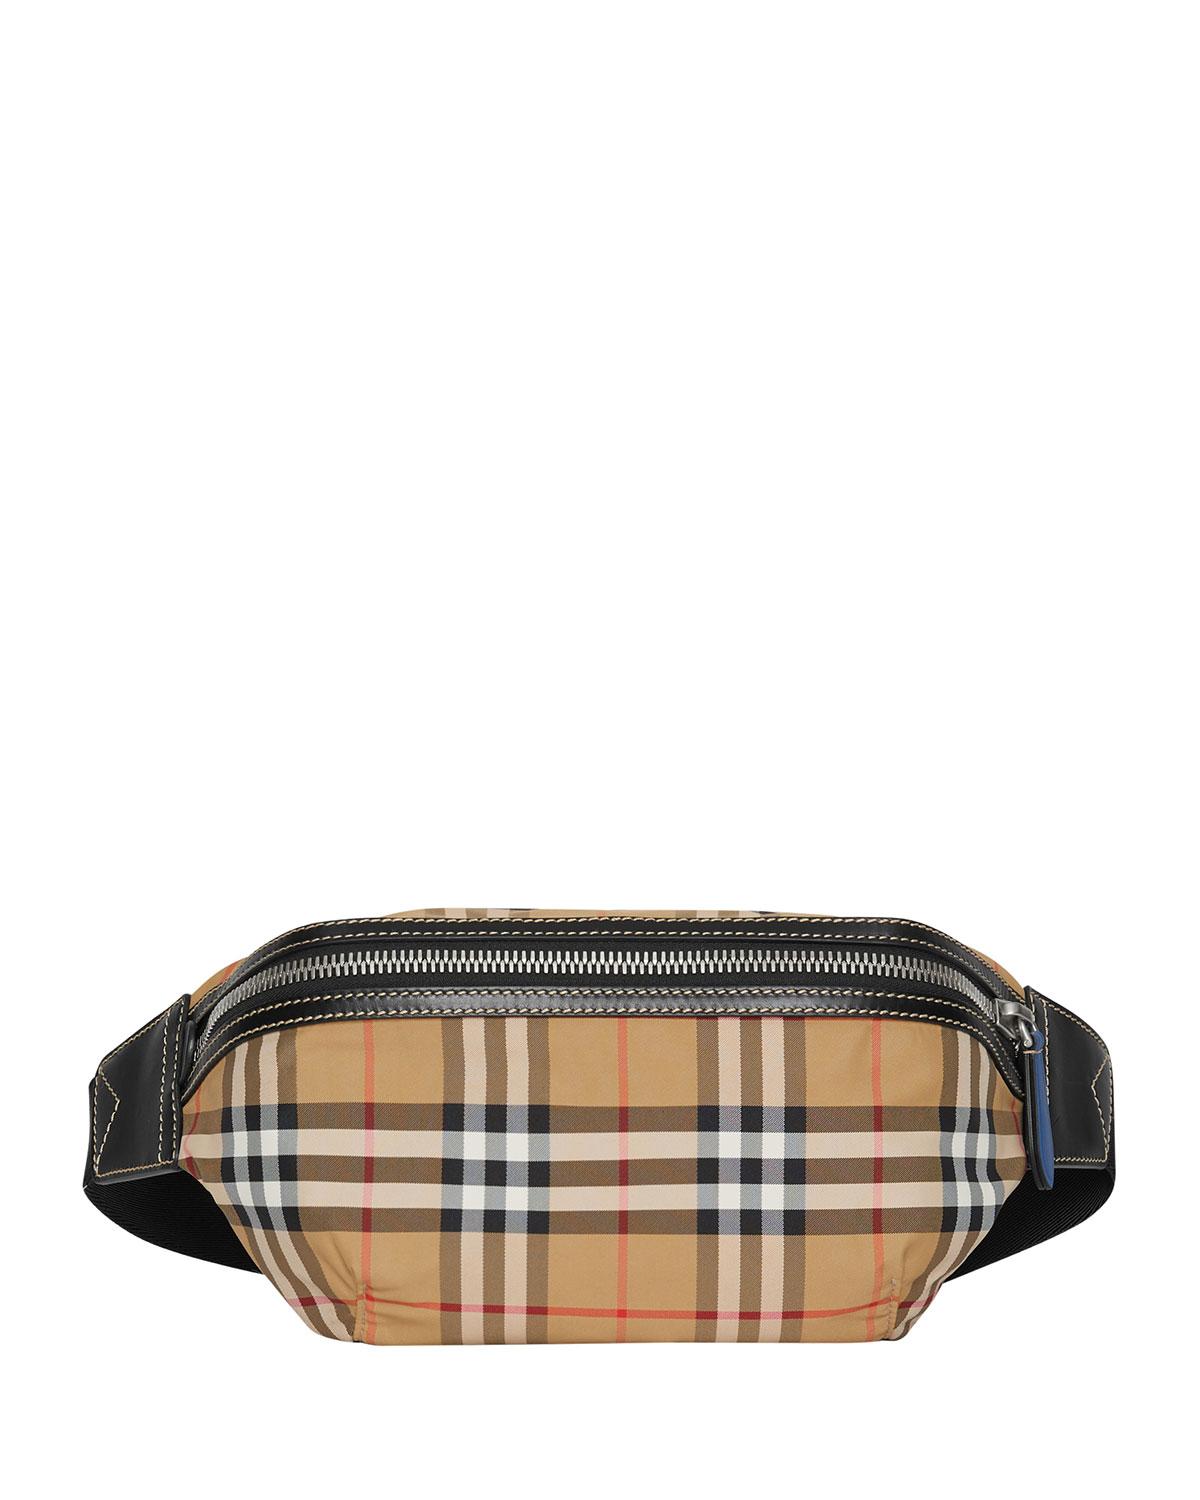 Burberry Leather Sonny Vintage Check 